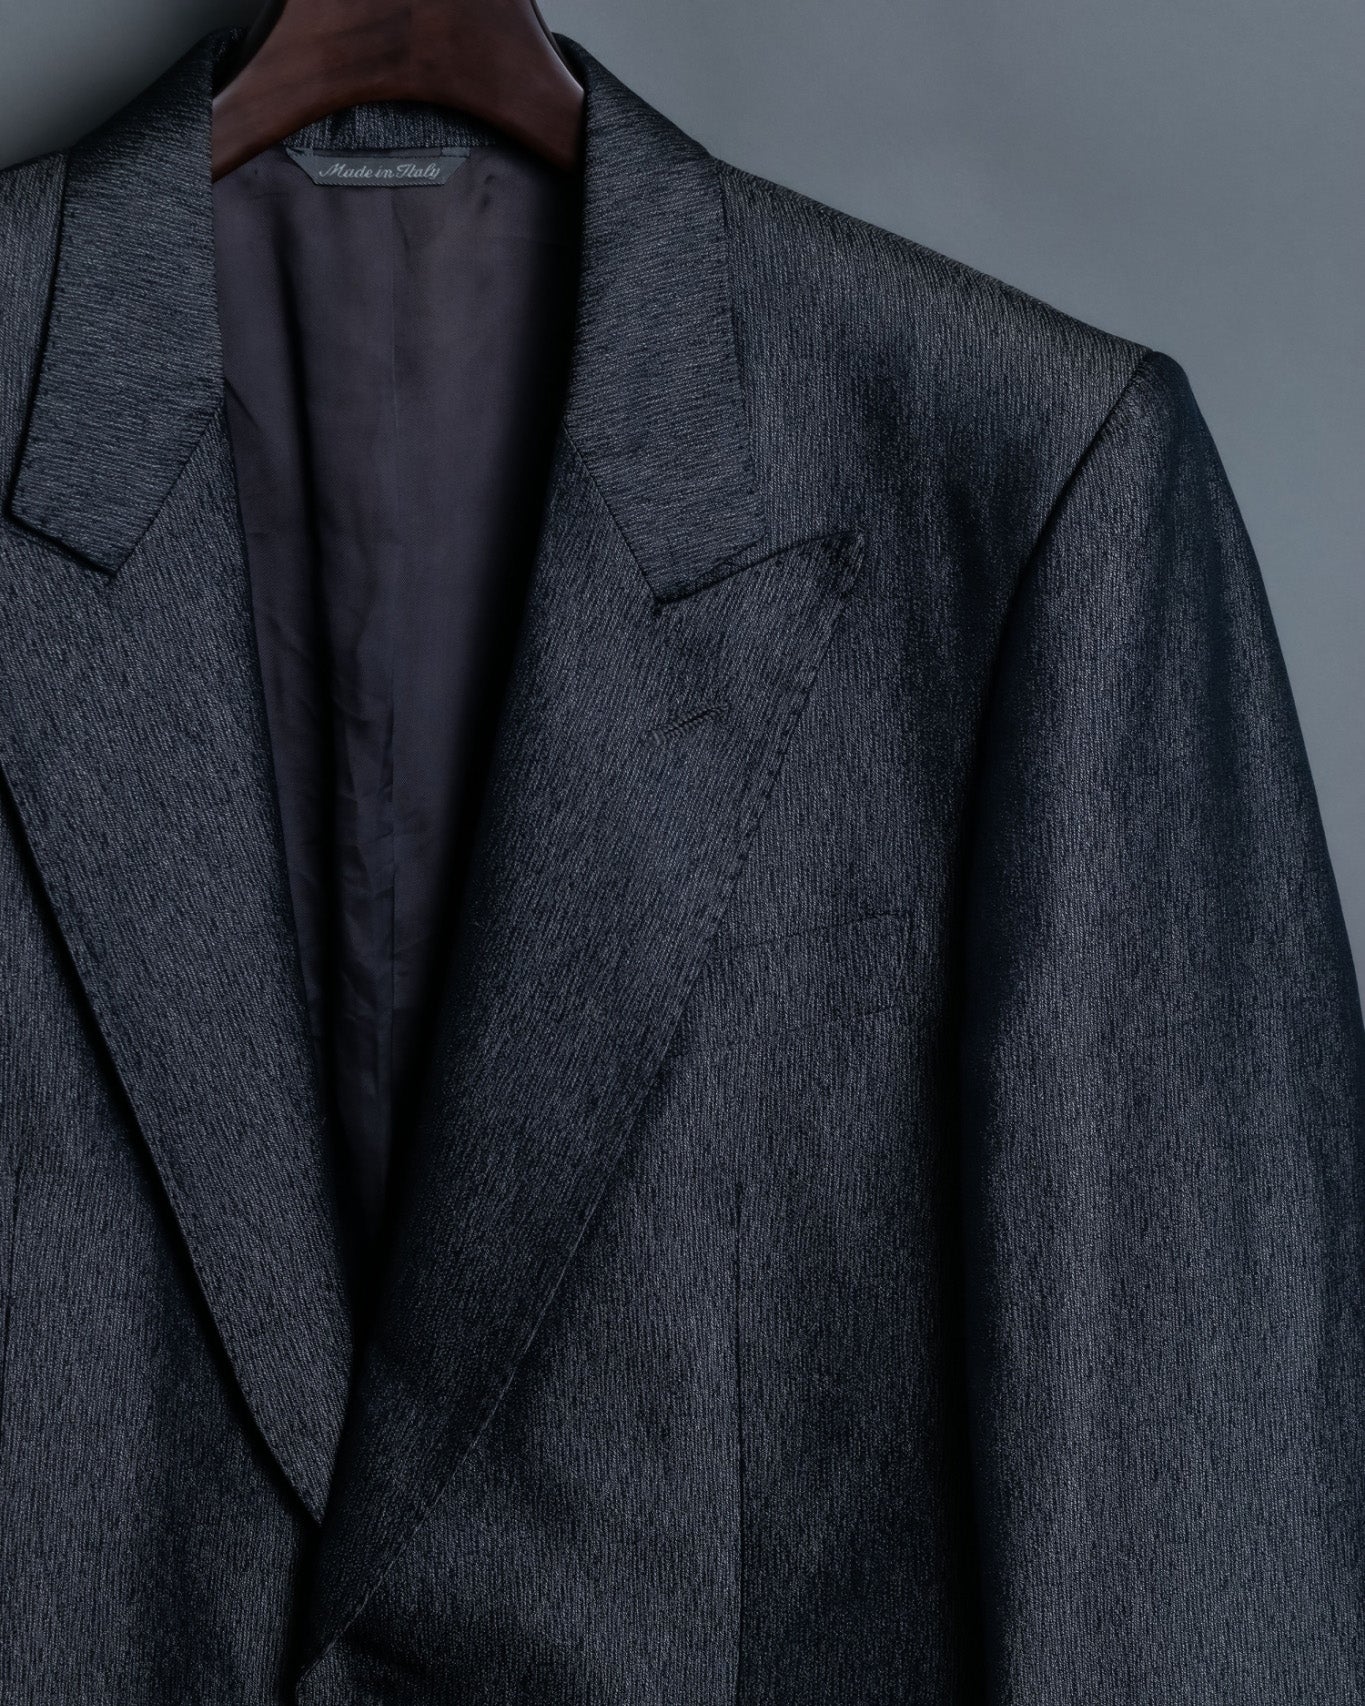 "DEAD STOCK" Dull And Glowing Gray Tailored Jacket